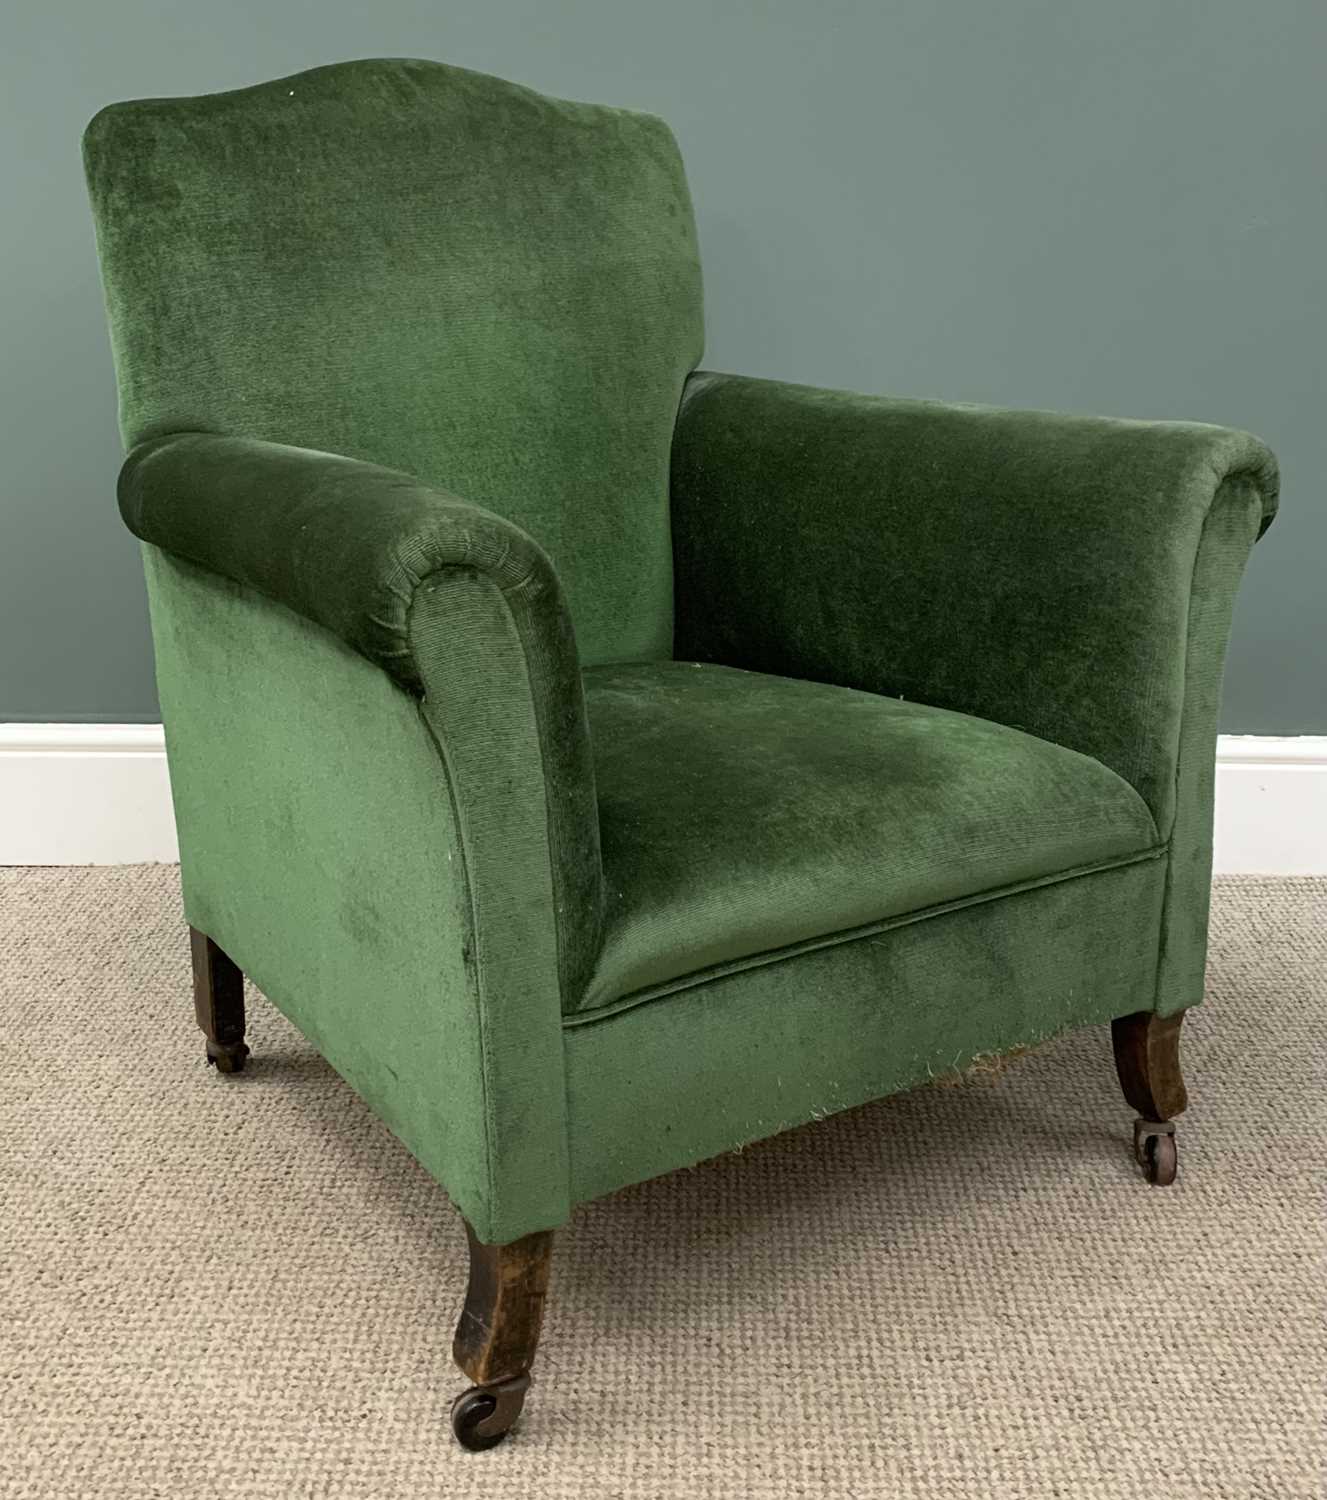 VINTAGE ARMCHAIR in green upholstery, 89 (h) x 80 (w) x 52 (d) cms Provenance: Private collection - Image 2 of 4